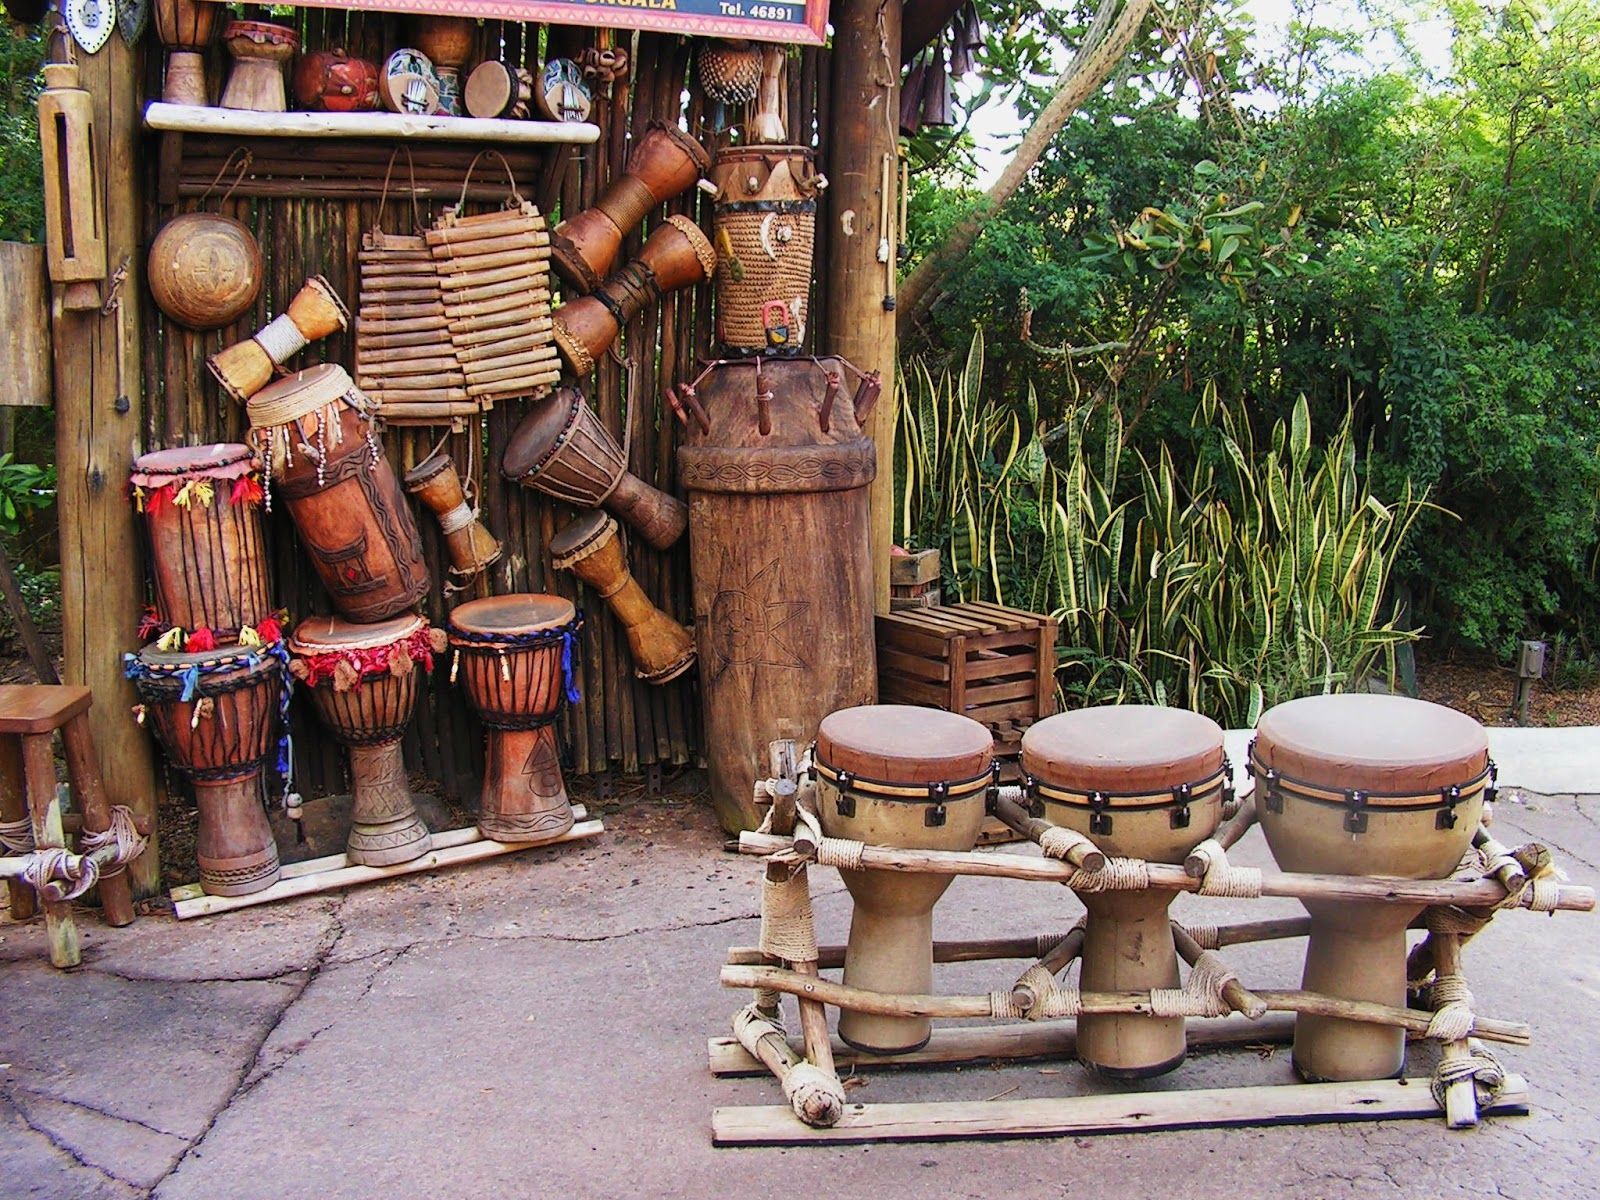 African drums in Animal Kingdom. Photography